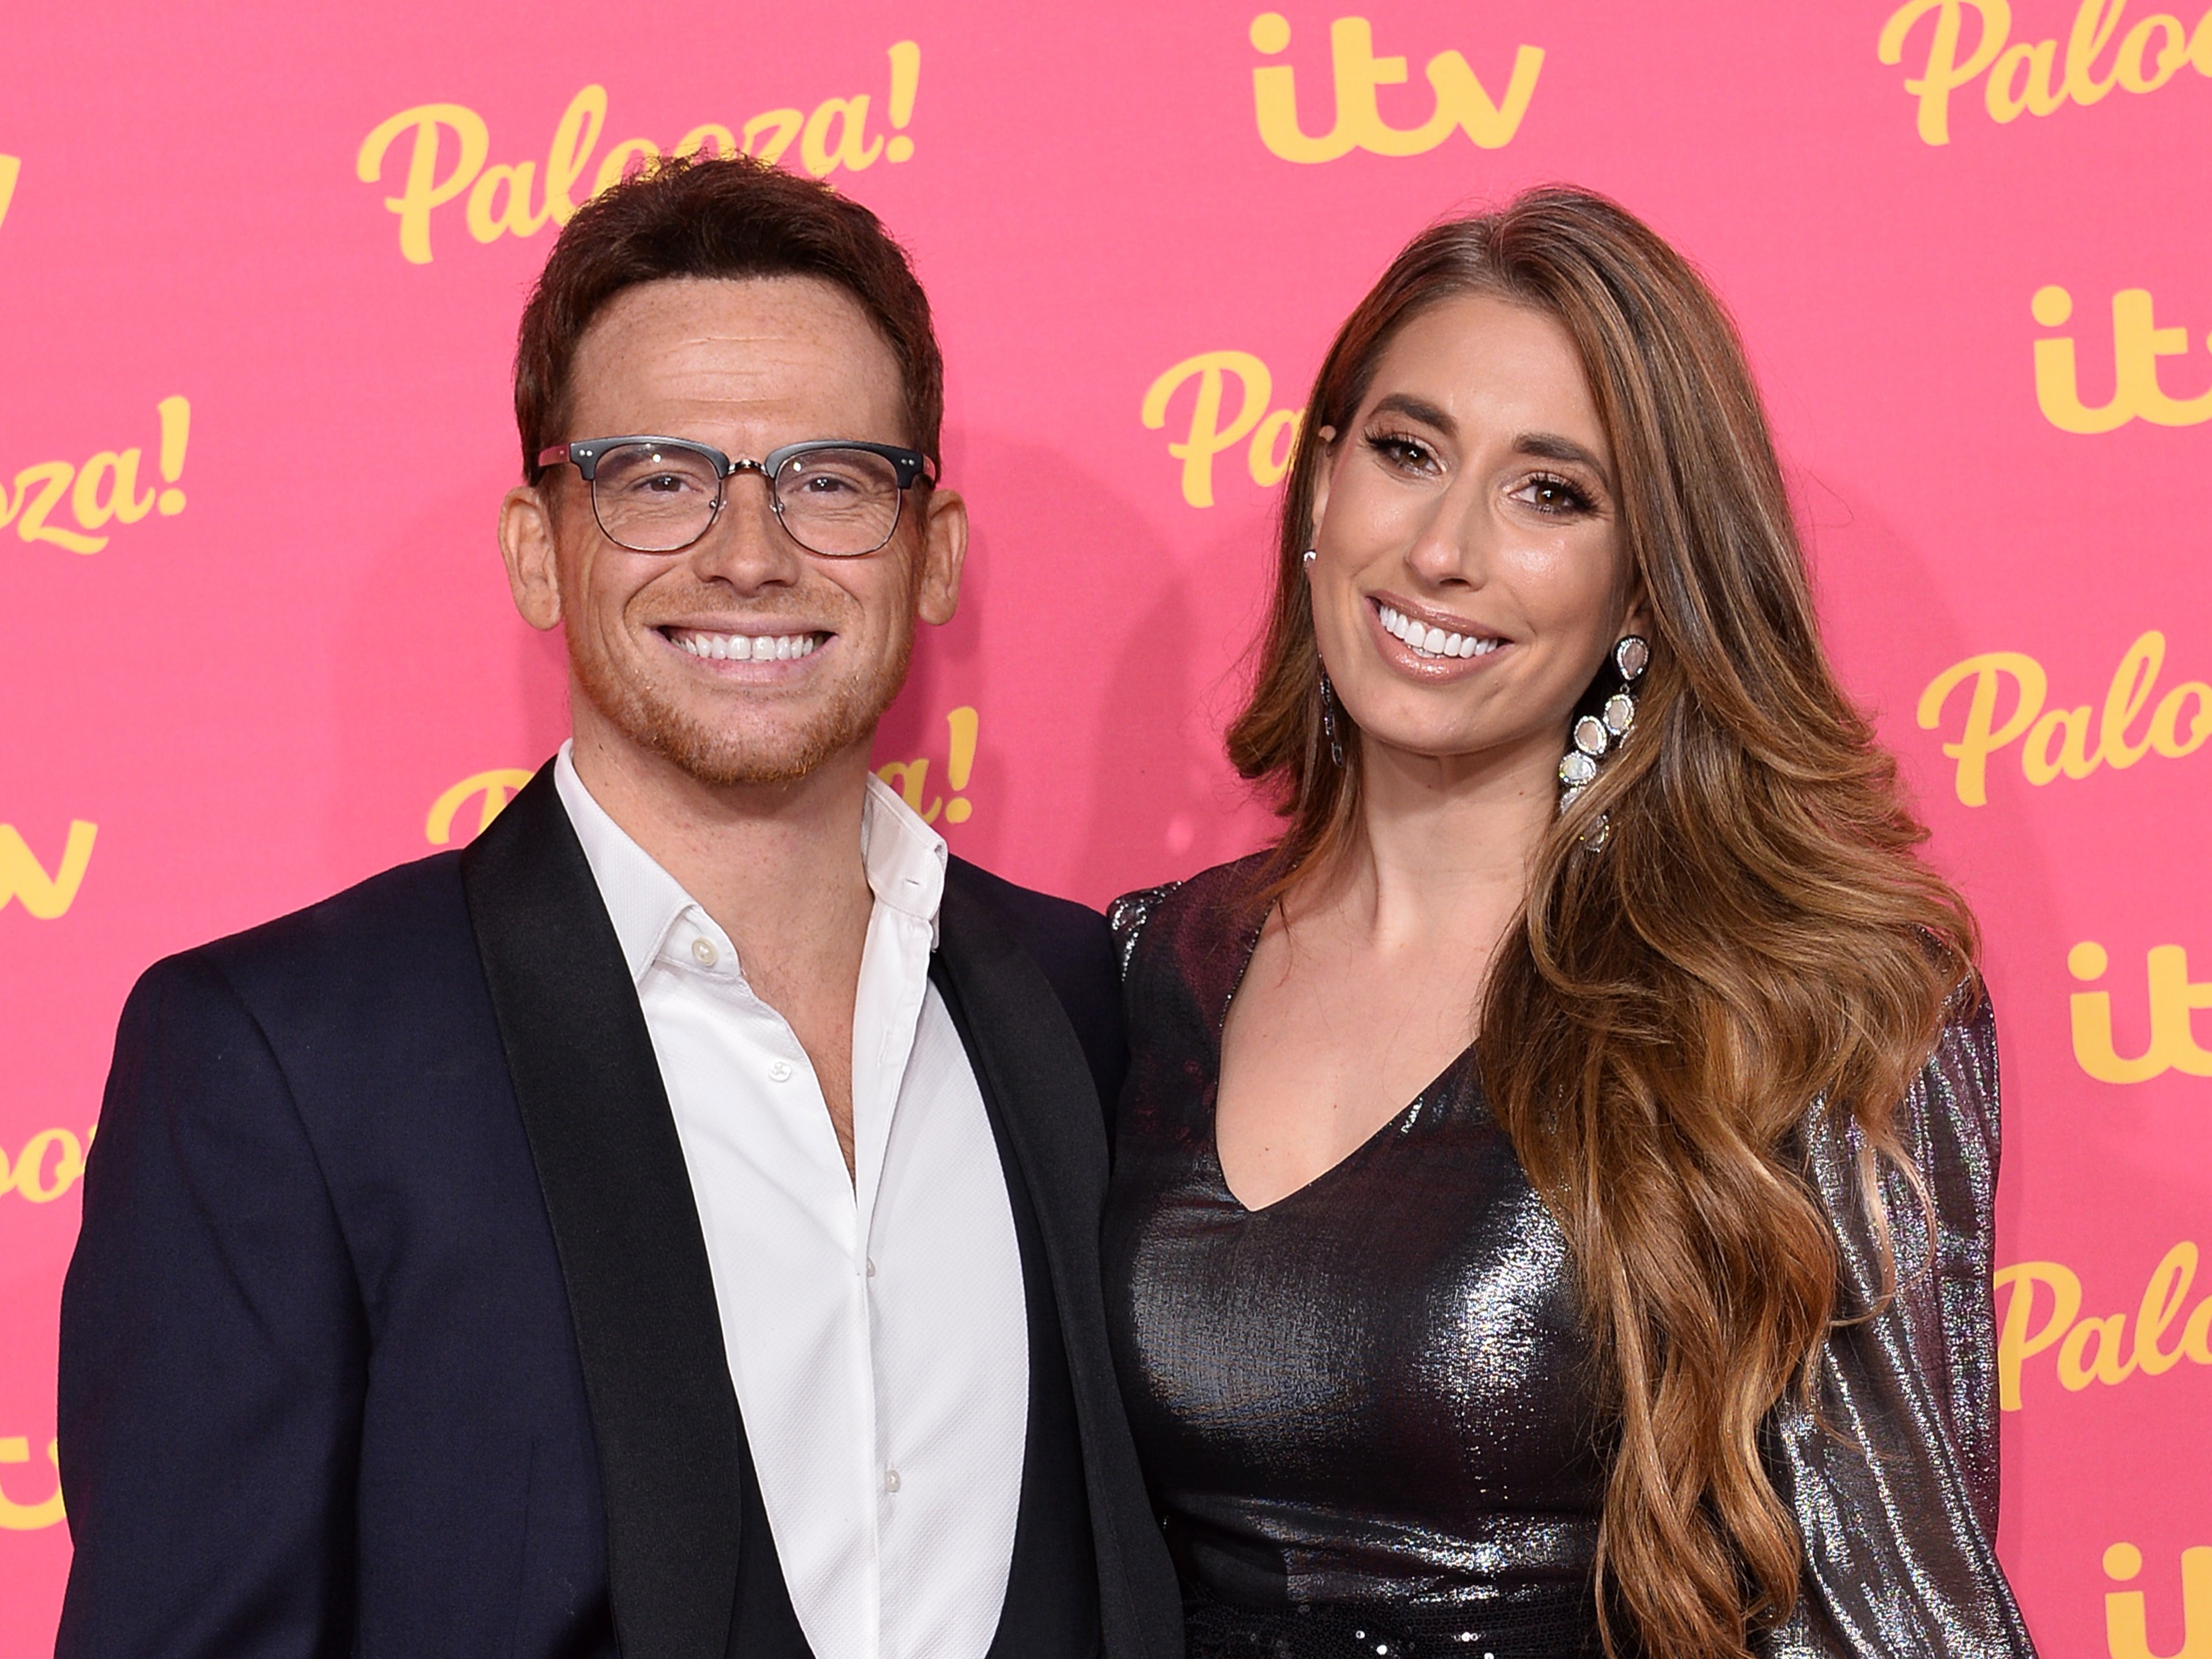 Joe Swash and Stacey Solomon wed on July 2022